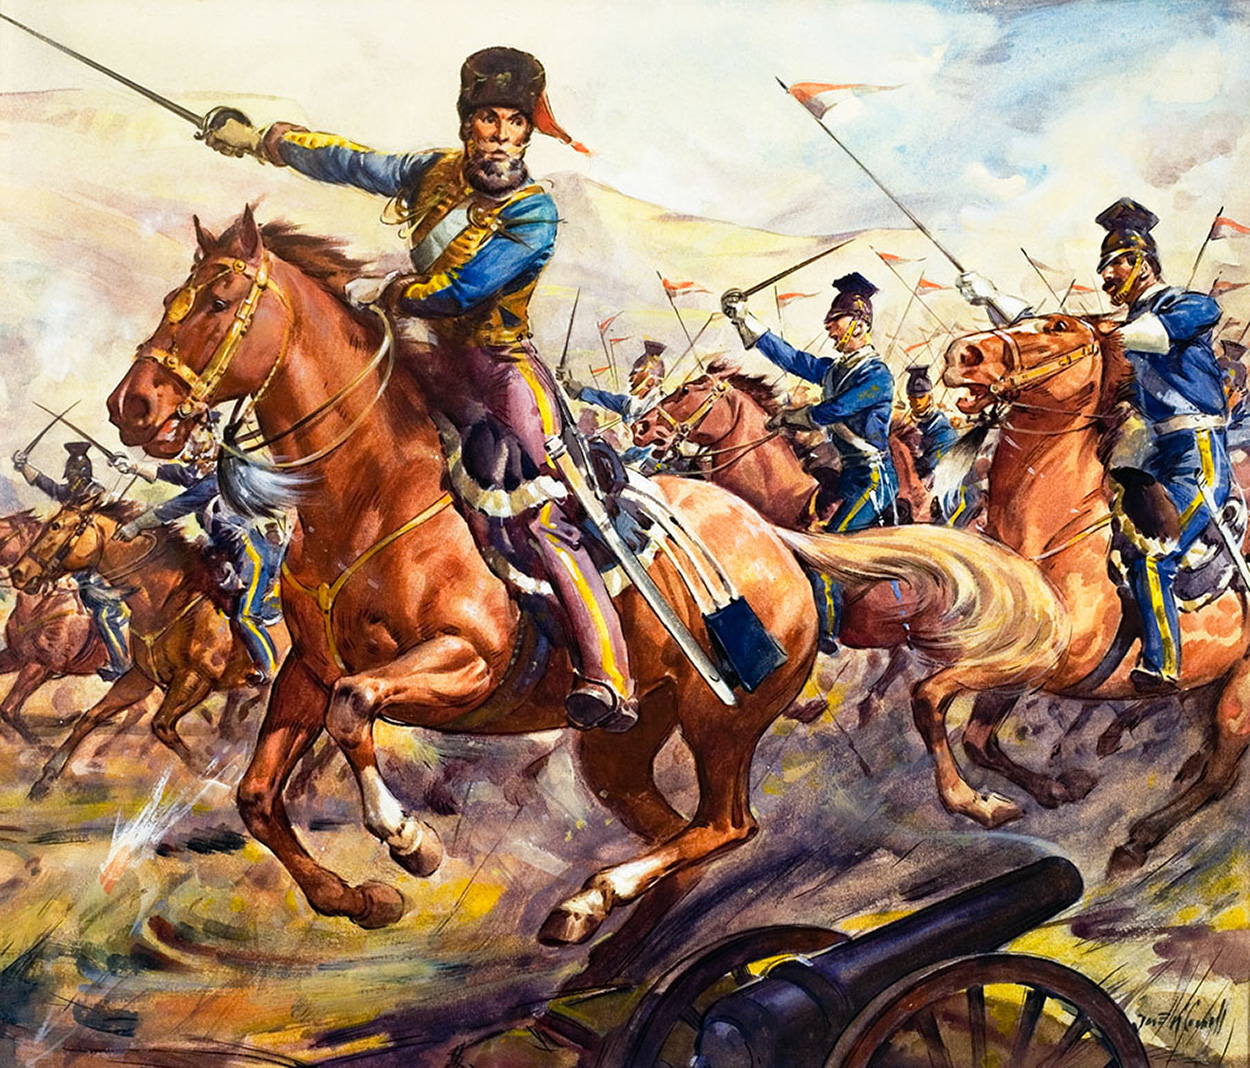 The Charge of the Light Brigade (Original) (Signed) art by James E McConnell Art at The Illustration Art Gallery